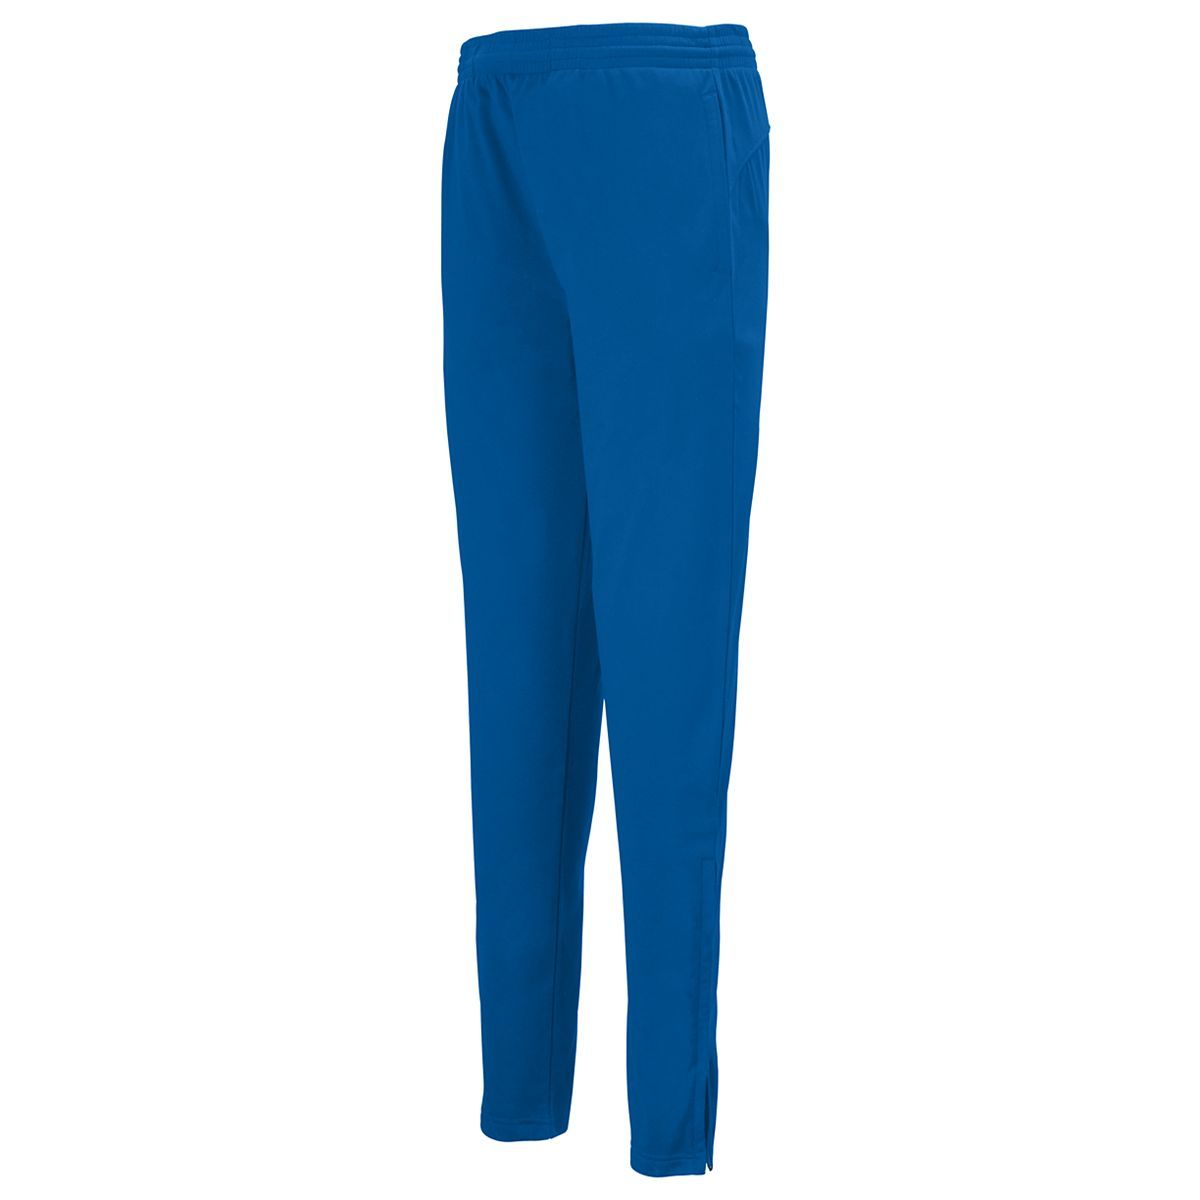 Augusta Sportswear Tapered Leg Pant in Royal  -Part of the Adult, Adult-Pants, Pants, Augusta-Products product lines at KanaleyCreations.com